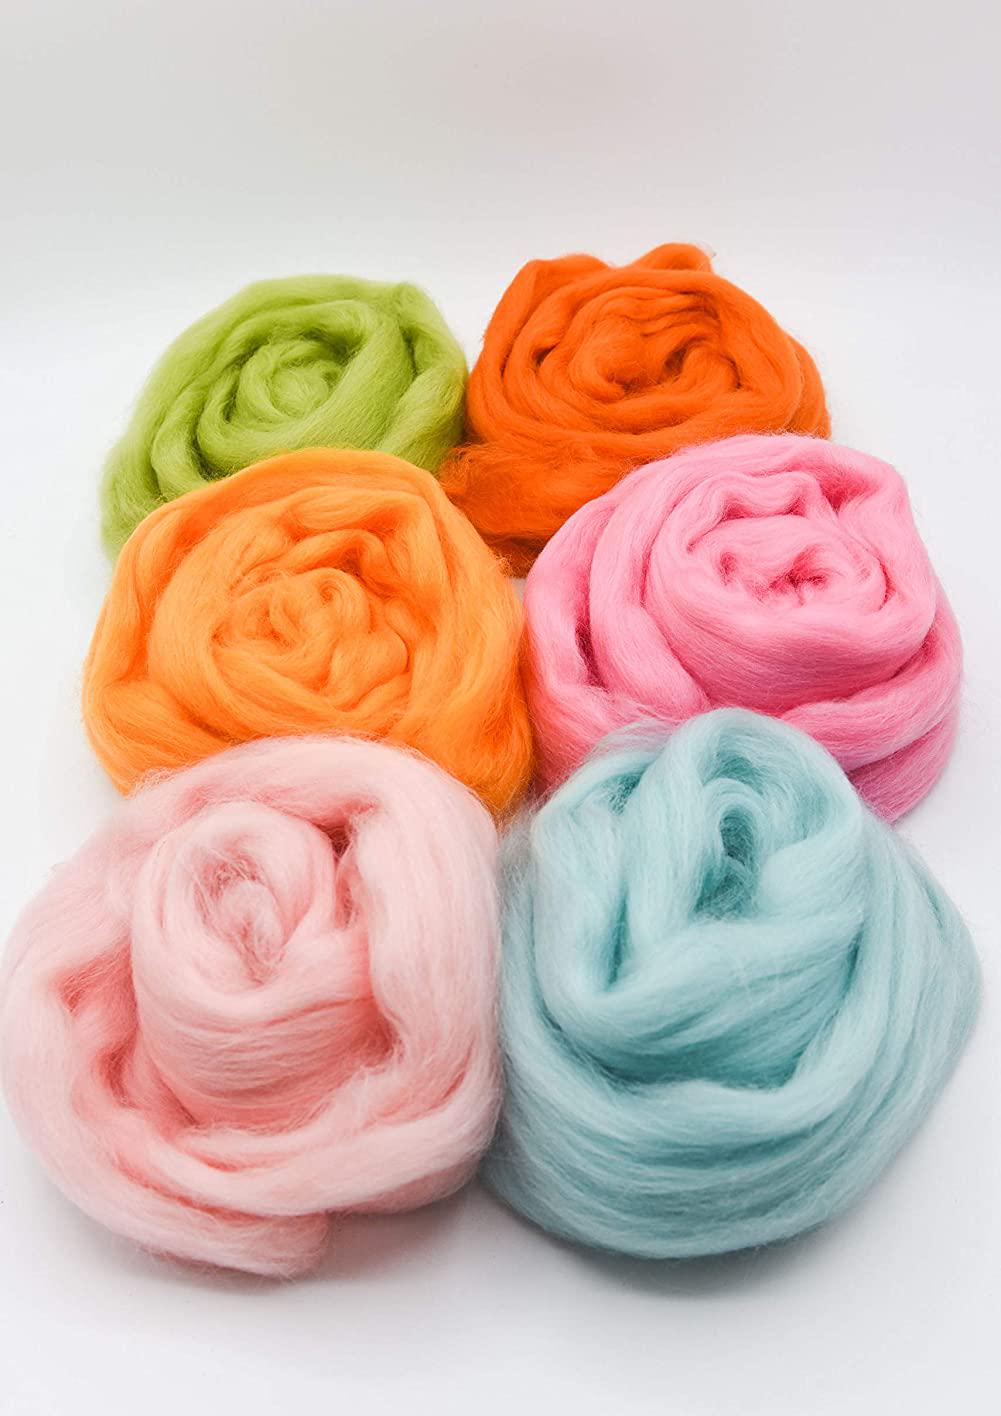 Hand Me a Craft, Easter Egg Wool Roving, Extra Fine Soft Combed Top Merino Wool 6-Pack Kit Roving with Storage Container for Needle Felting, Spinning Yarn, Fiber Arts and Crafts